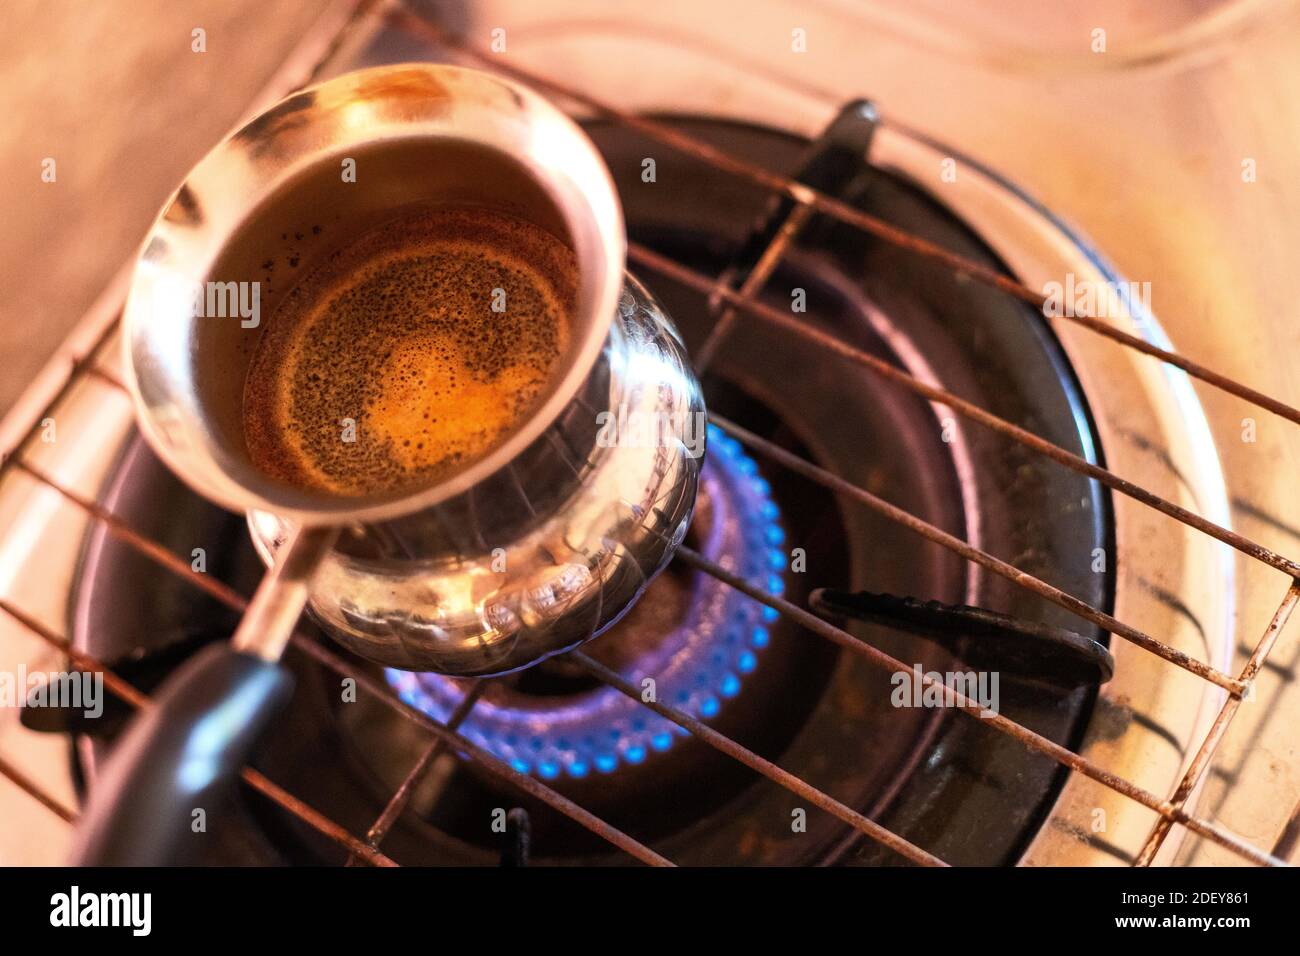 Brown coffee in turk on gasoline stove. Turkish coffee brewing in cezve. Boiling black coffee on fire. Morning breakfast routine. Refreshment drink re Stock Photo